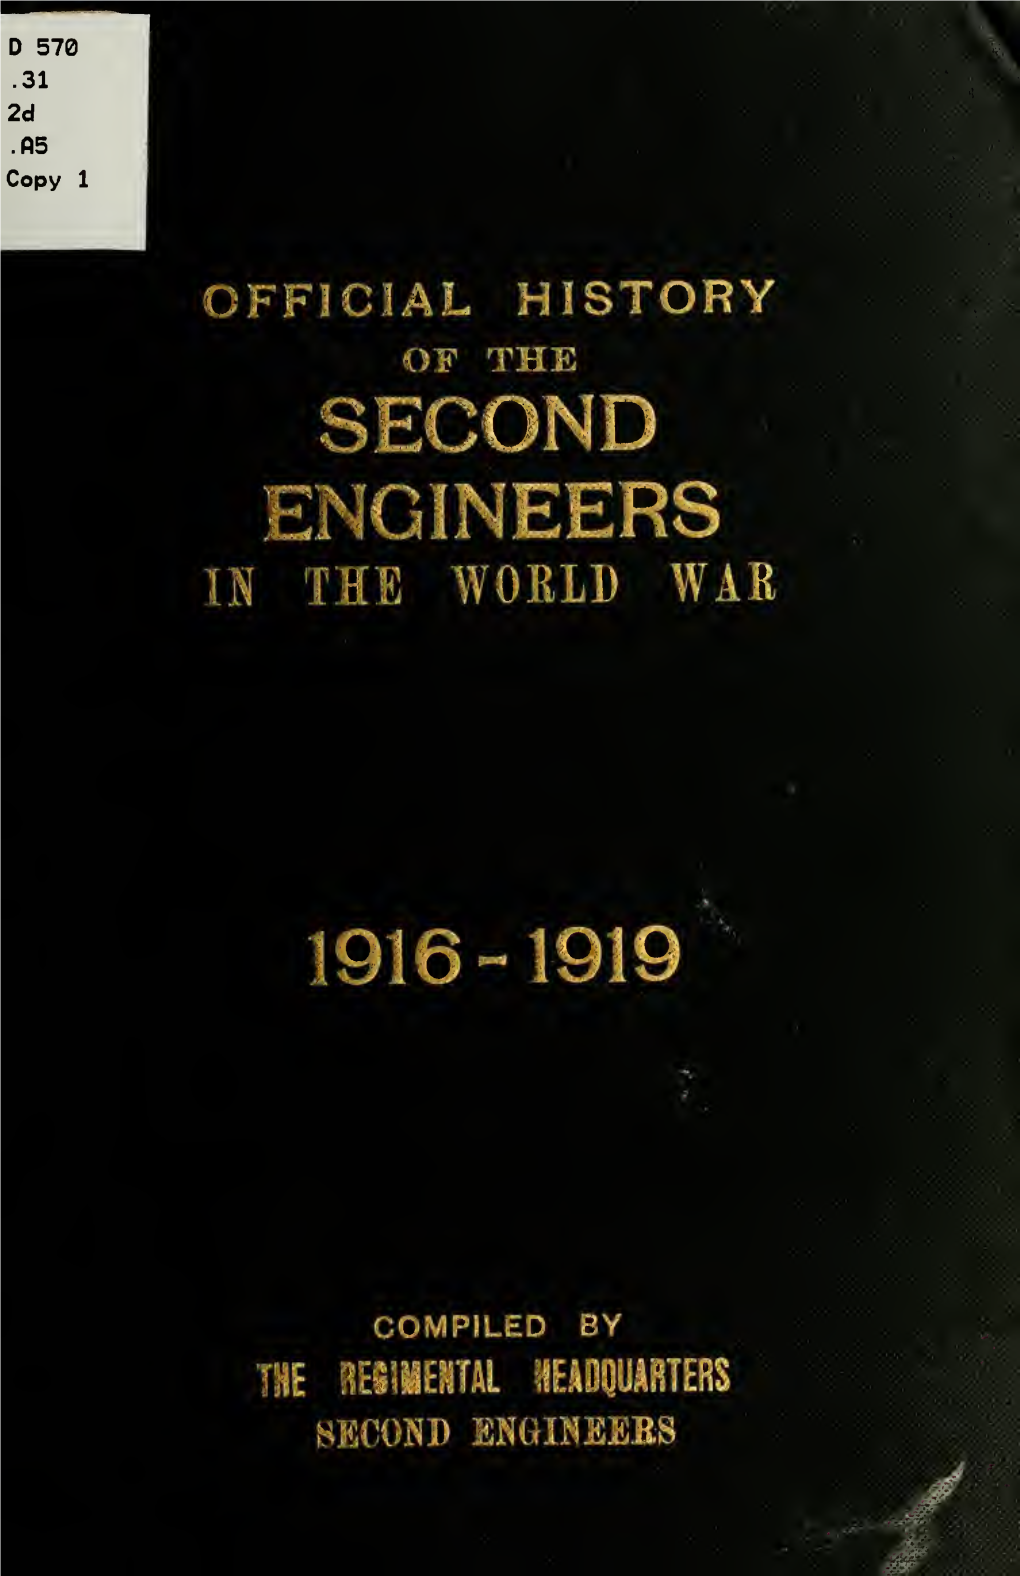 The Official History of the Second Regiment of Engineers and Second